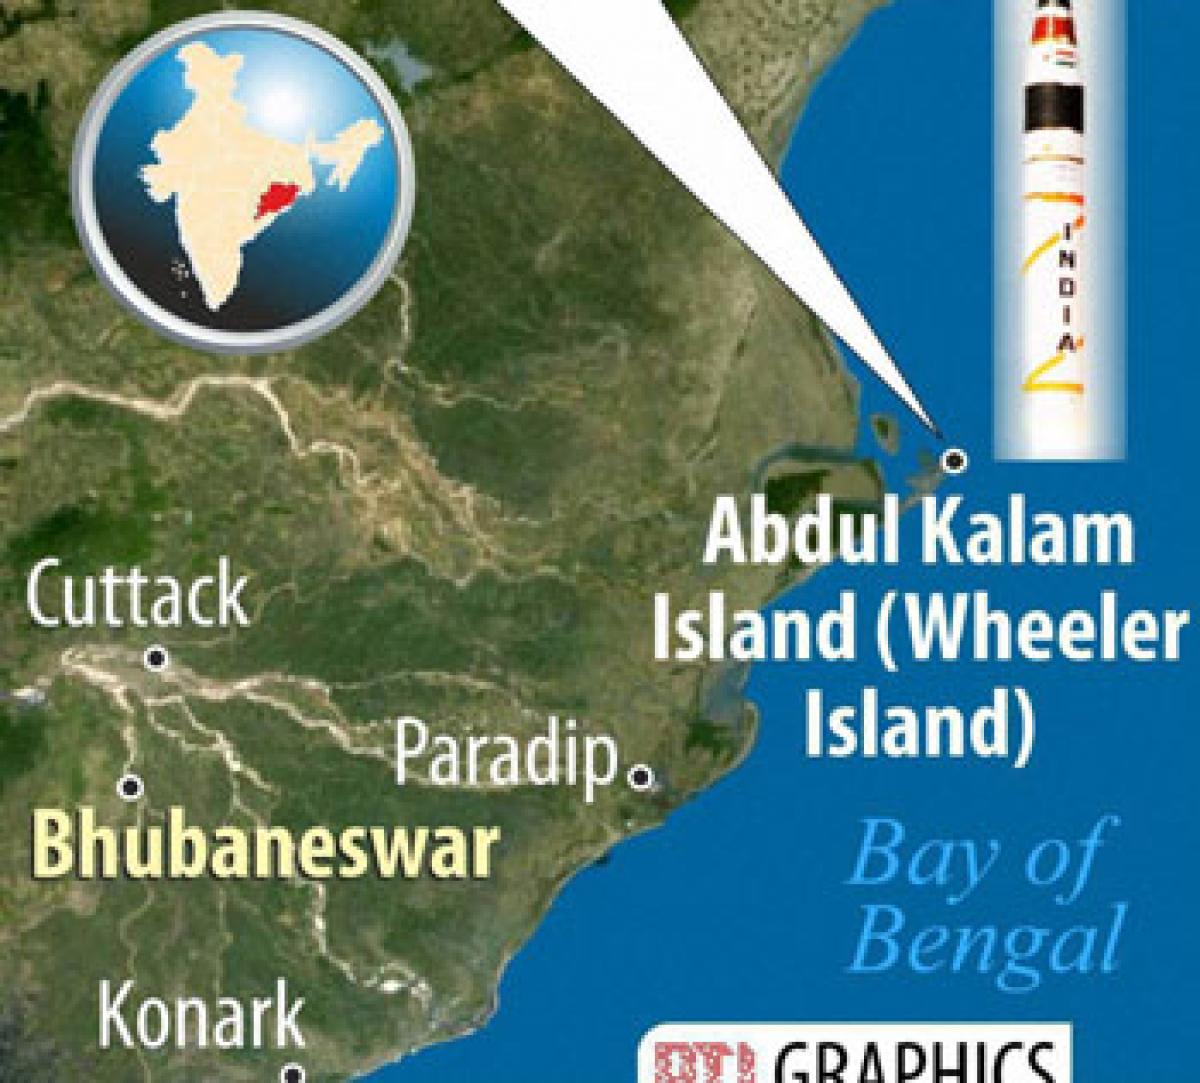 Agni-I missile test fired sucessfully